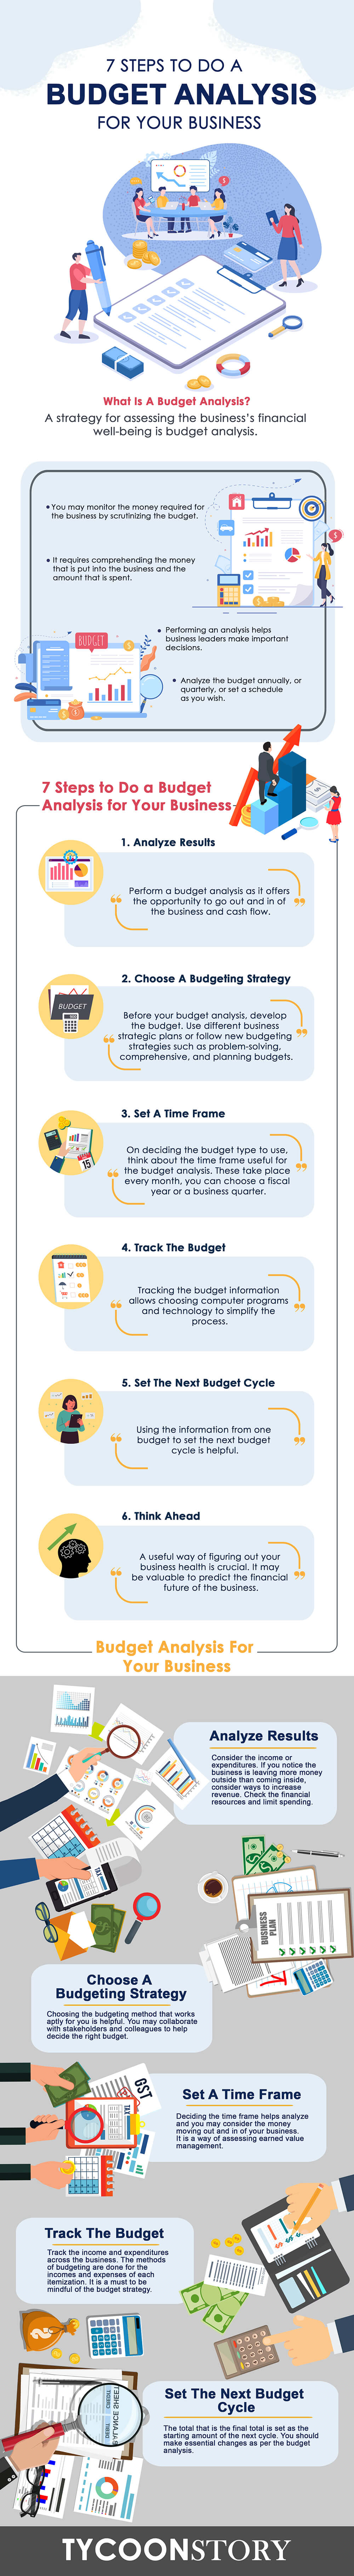 7 steps to do a budget analysis for your business infographic